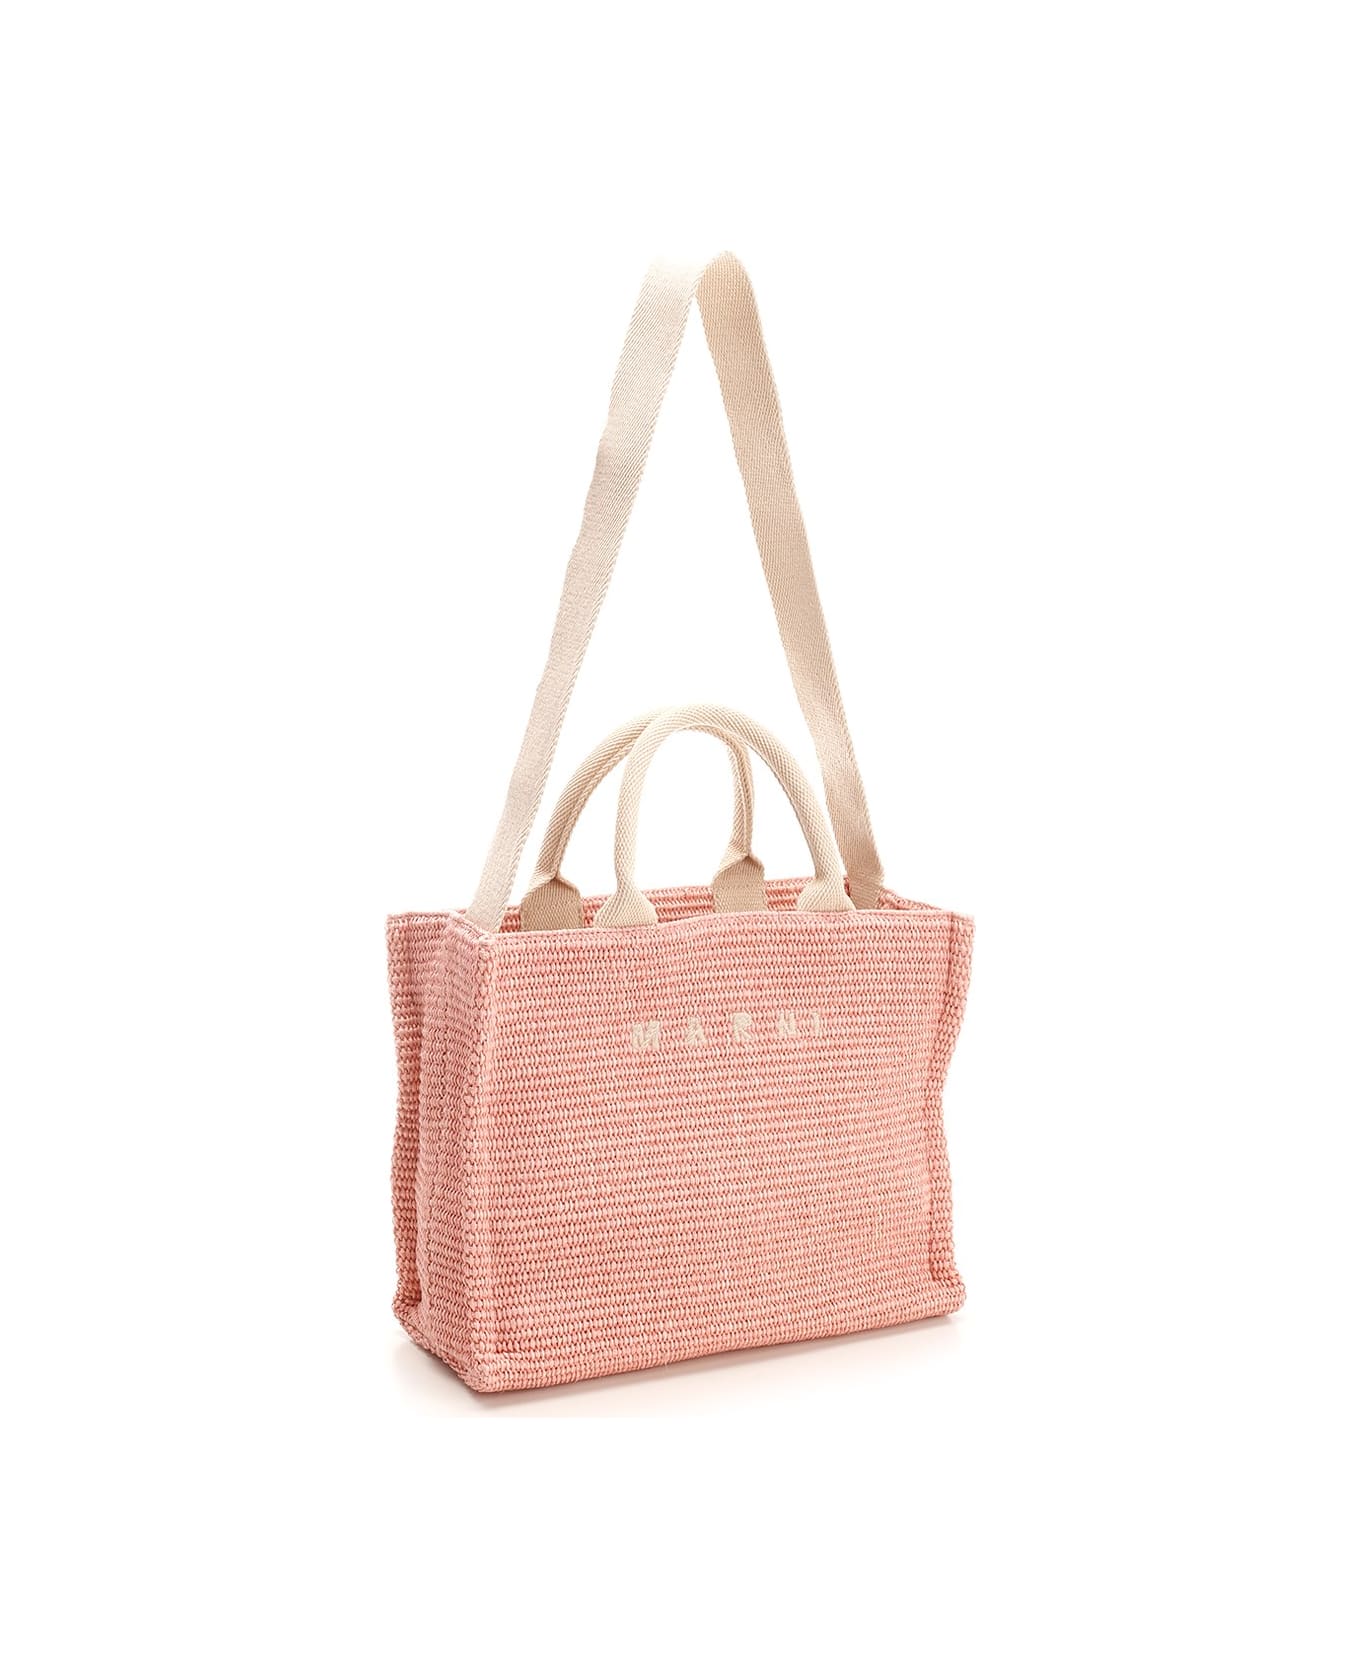 Marni 'east/west' Small Tote Bag - Rosa トートバッグ